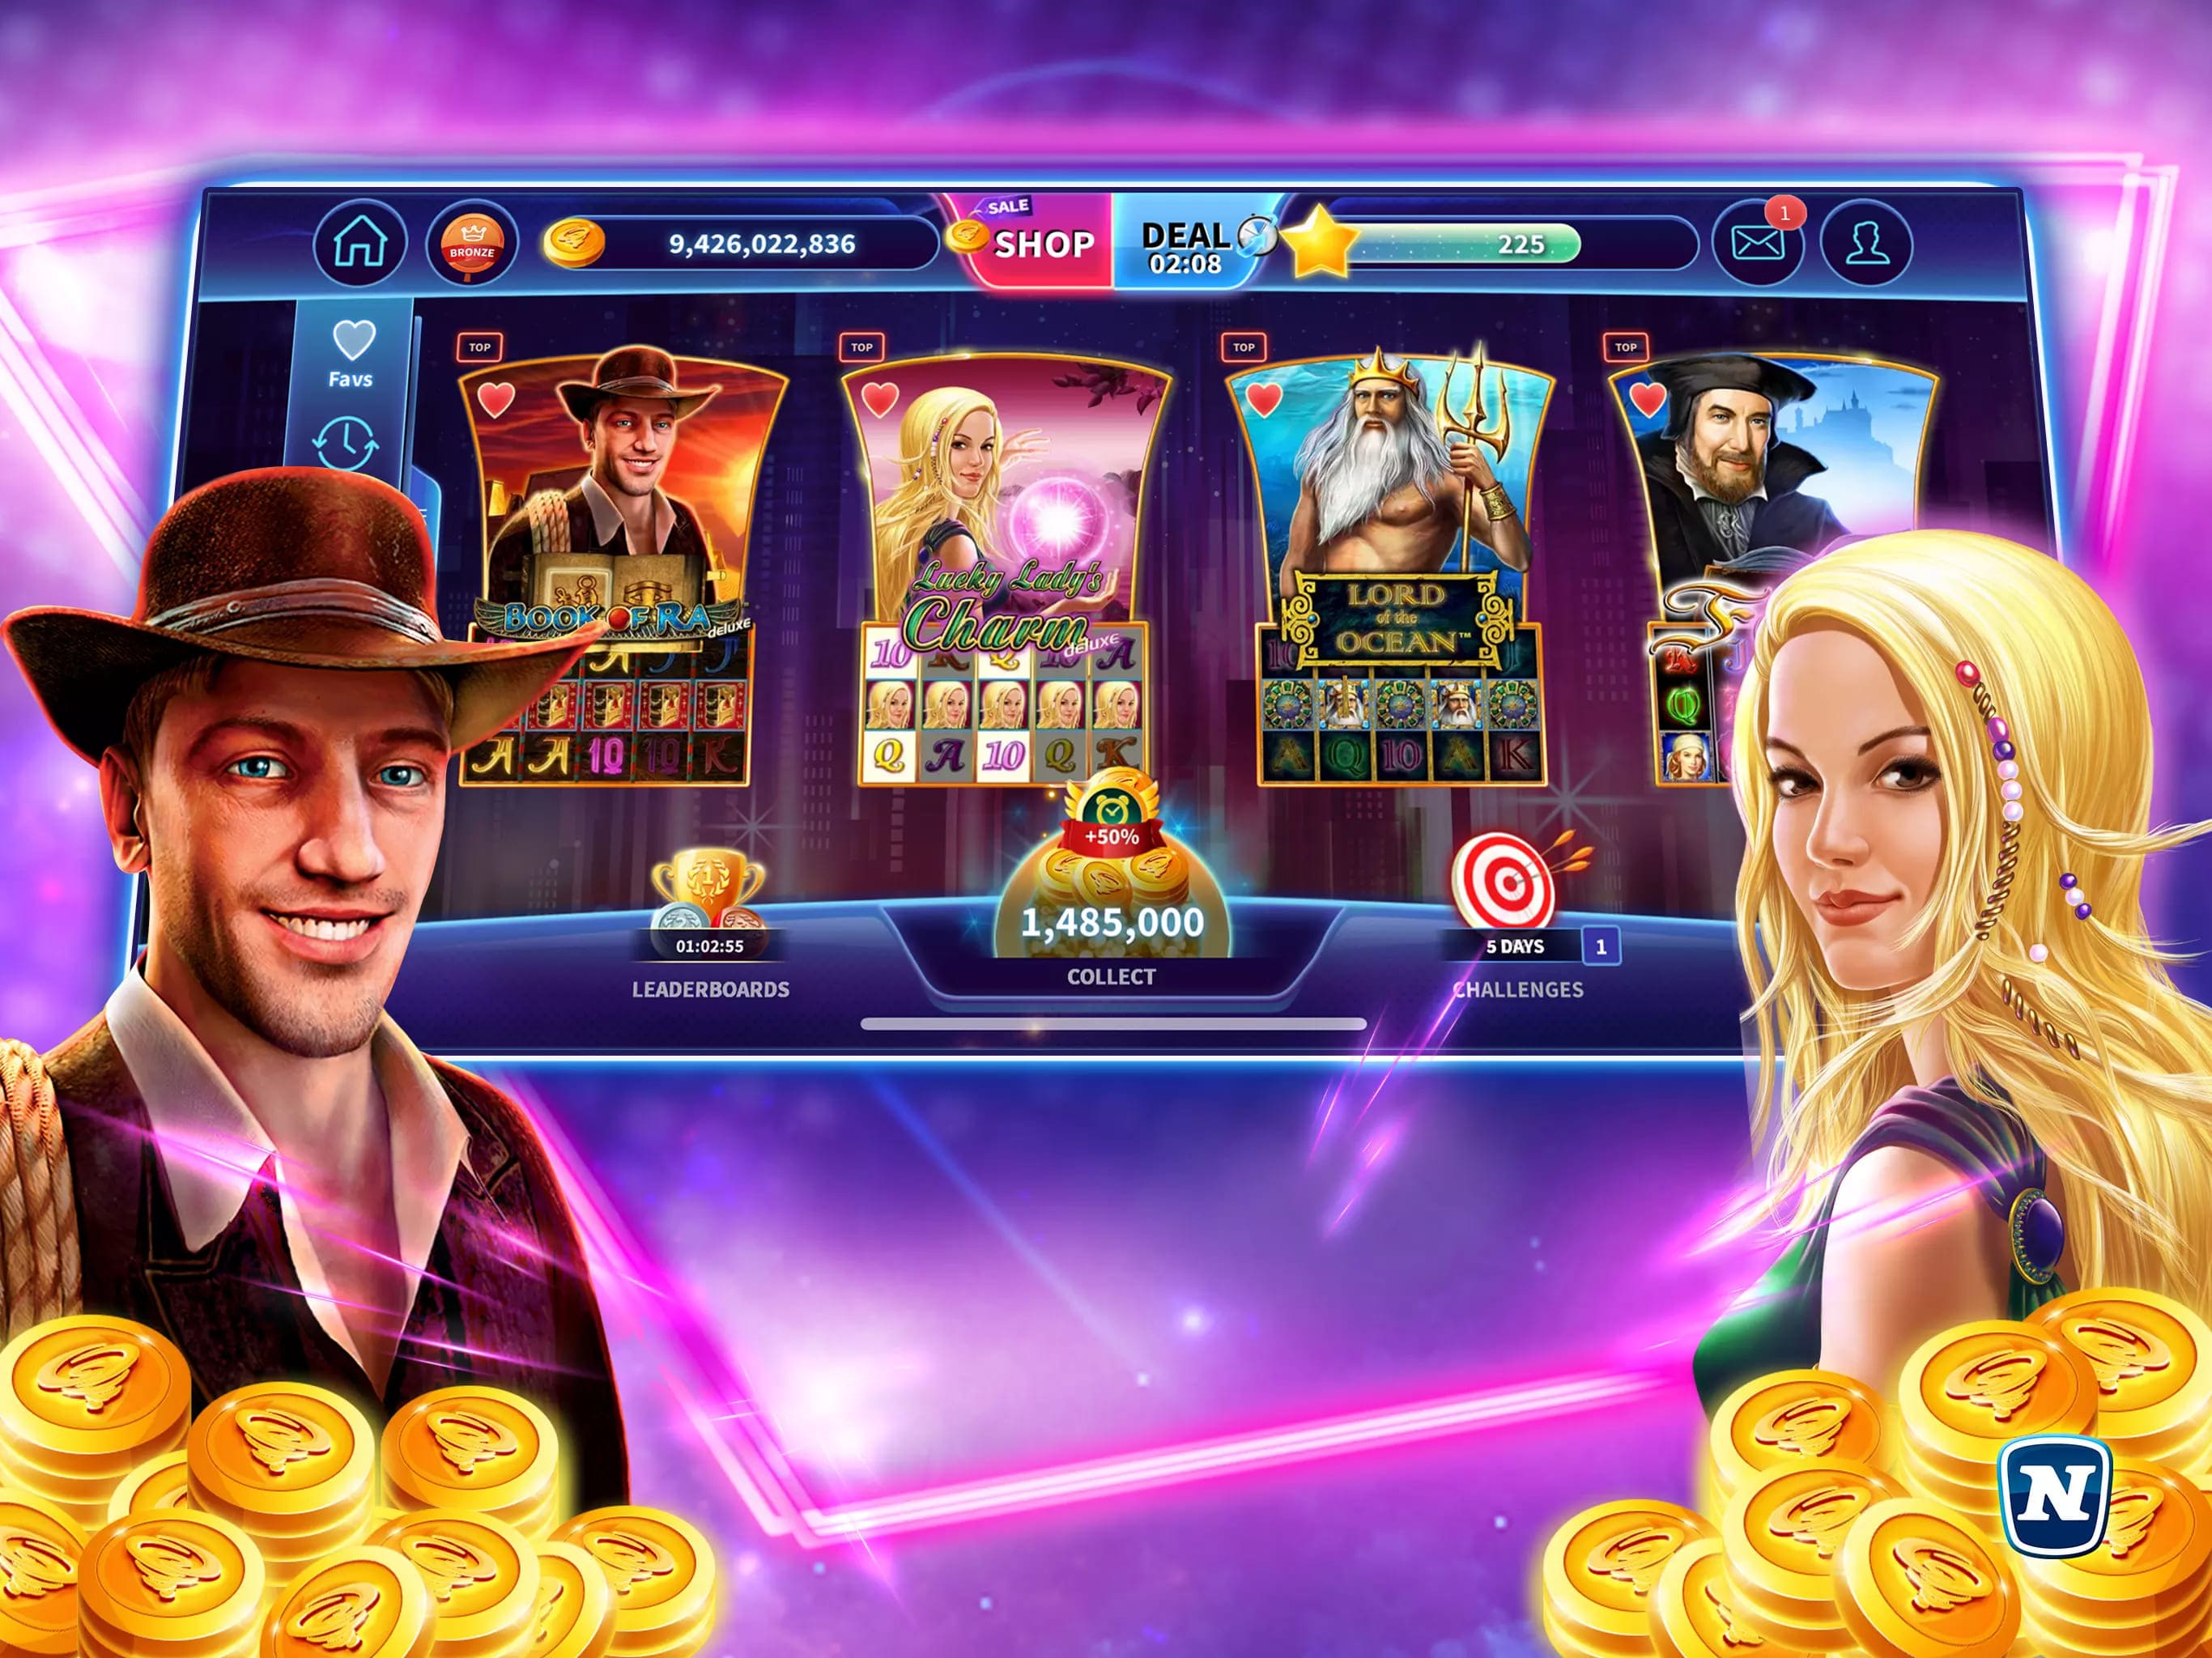 GameTwist Casino - Login and Sign Up for Free Play